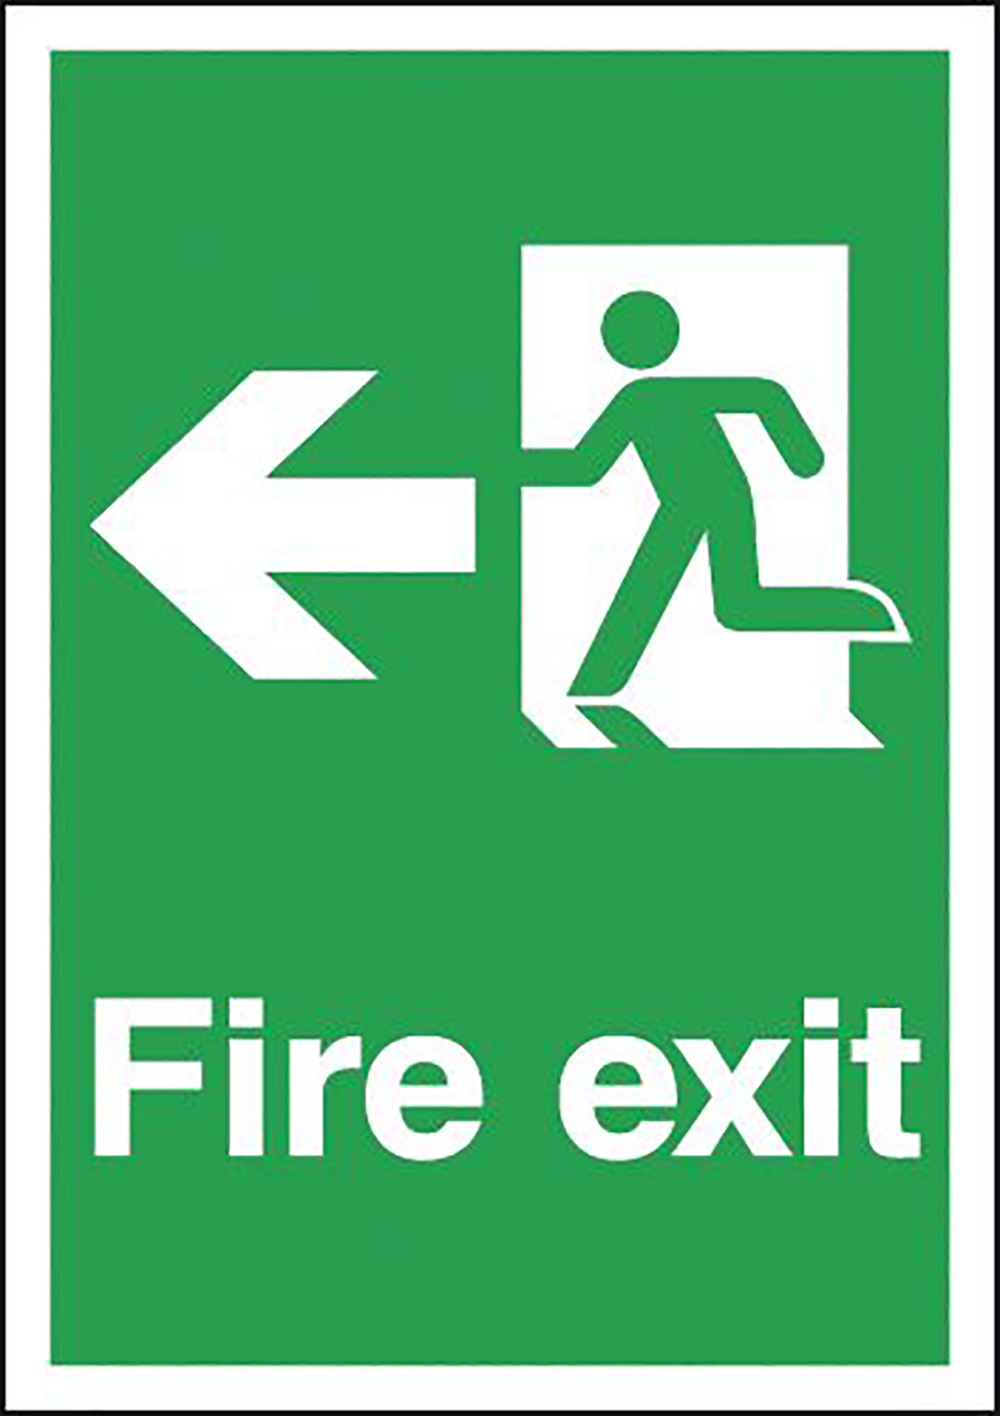 Fire Exit Running Man Left 297x210mm 1.2mm Rigid Plastic Safety Sign